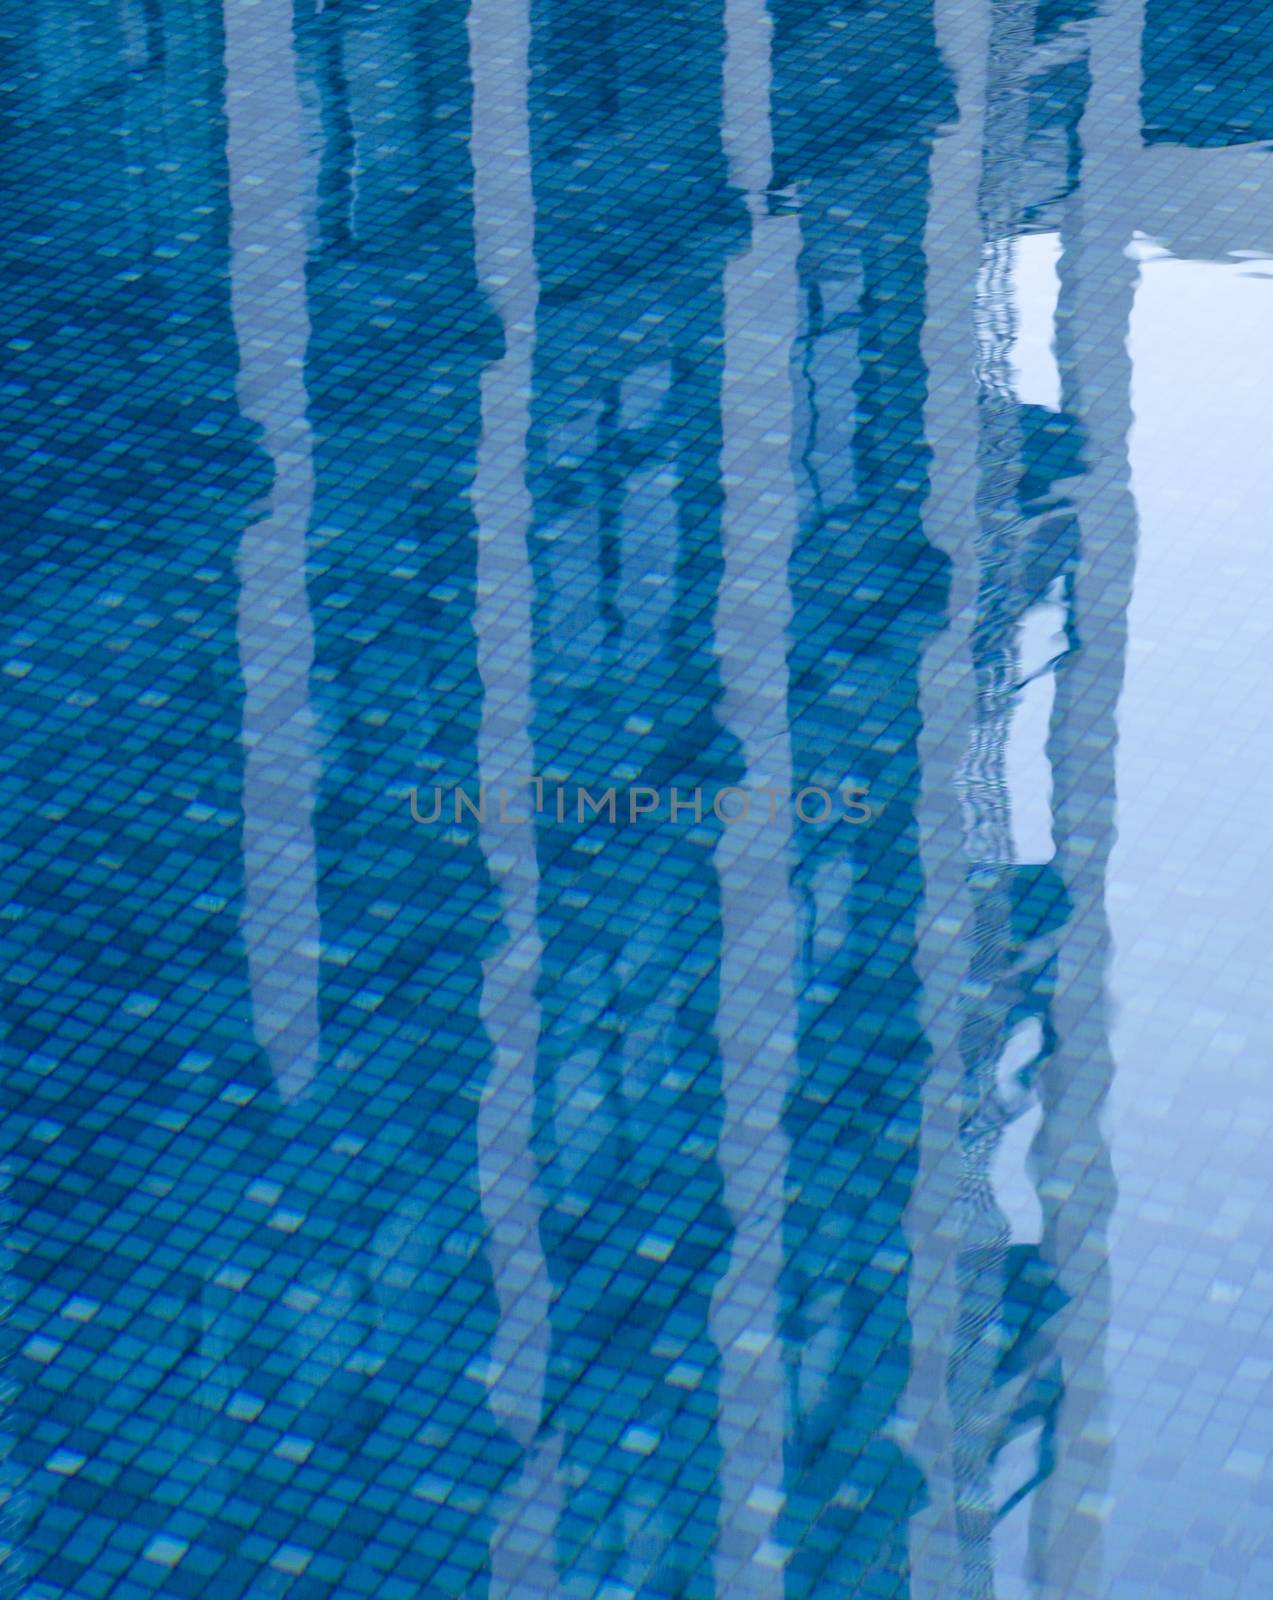 Reflections of building in the calm blue water of a swimming pool 